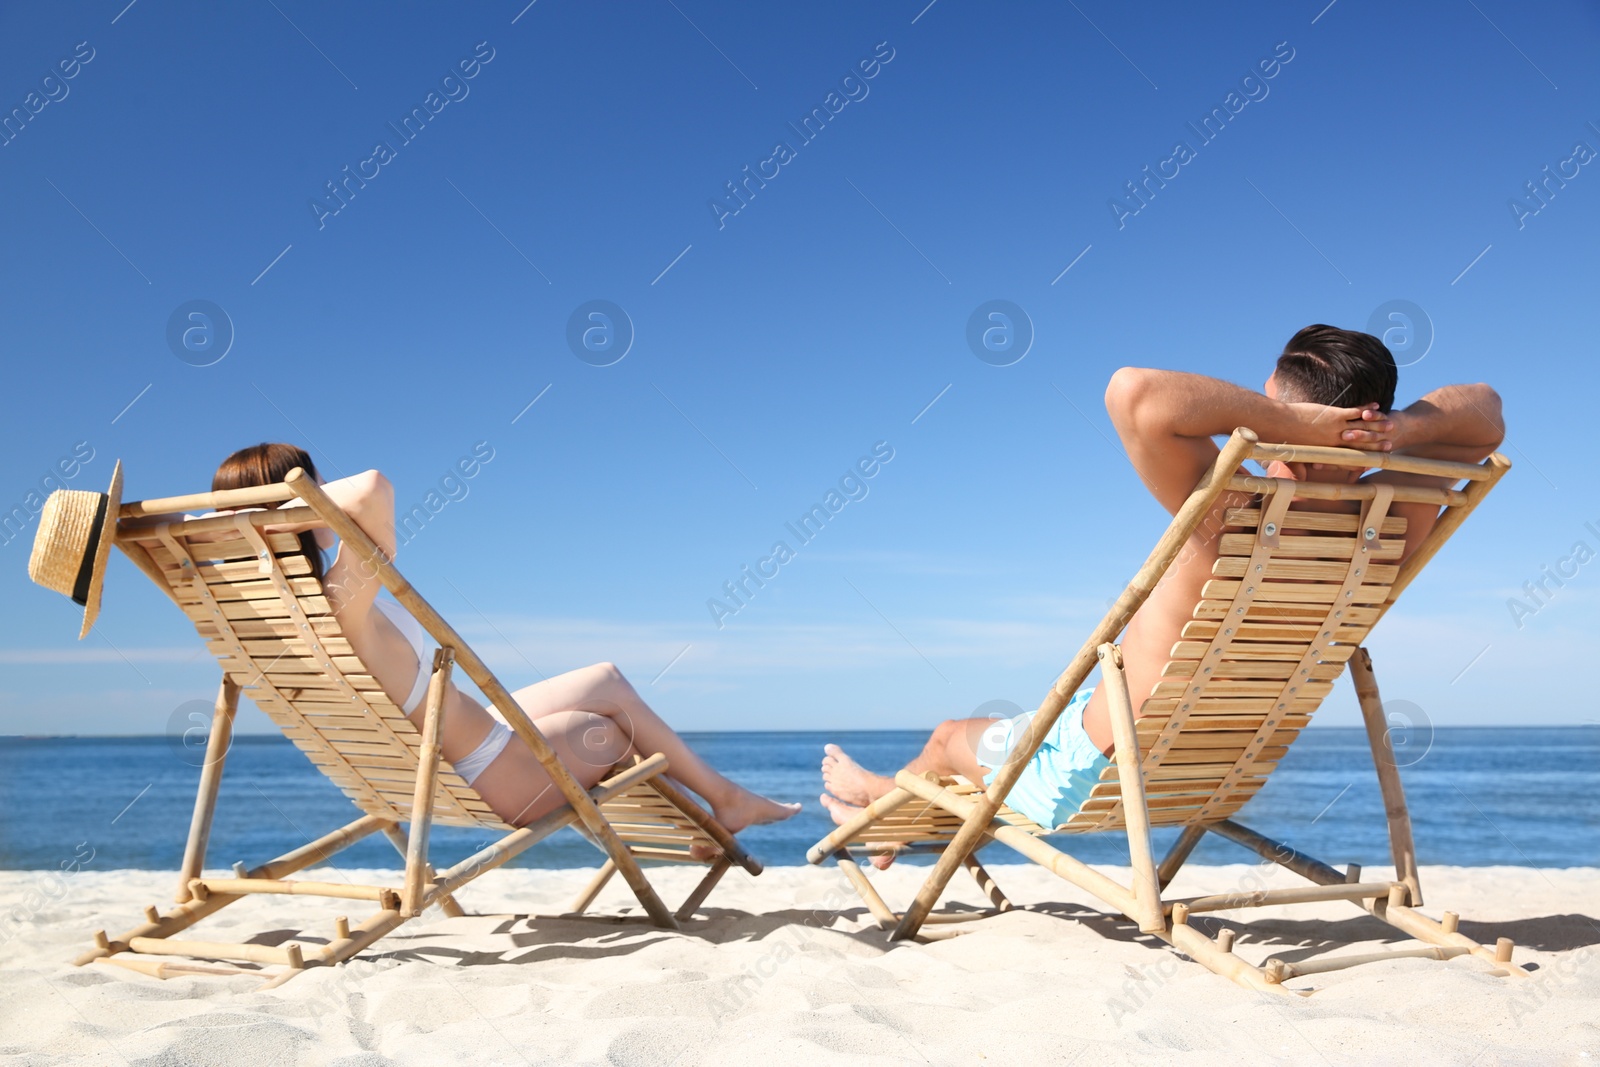 Photo of Woman in bikini and her boyfriend on deck chairs at beach. Lovely couple